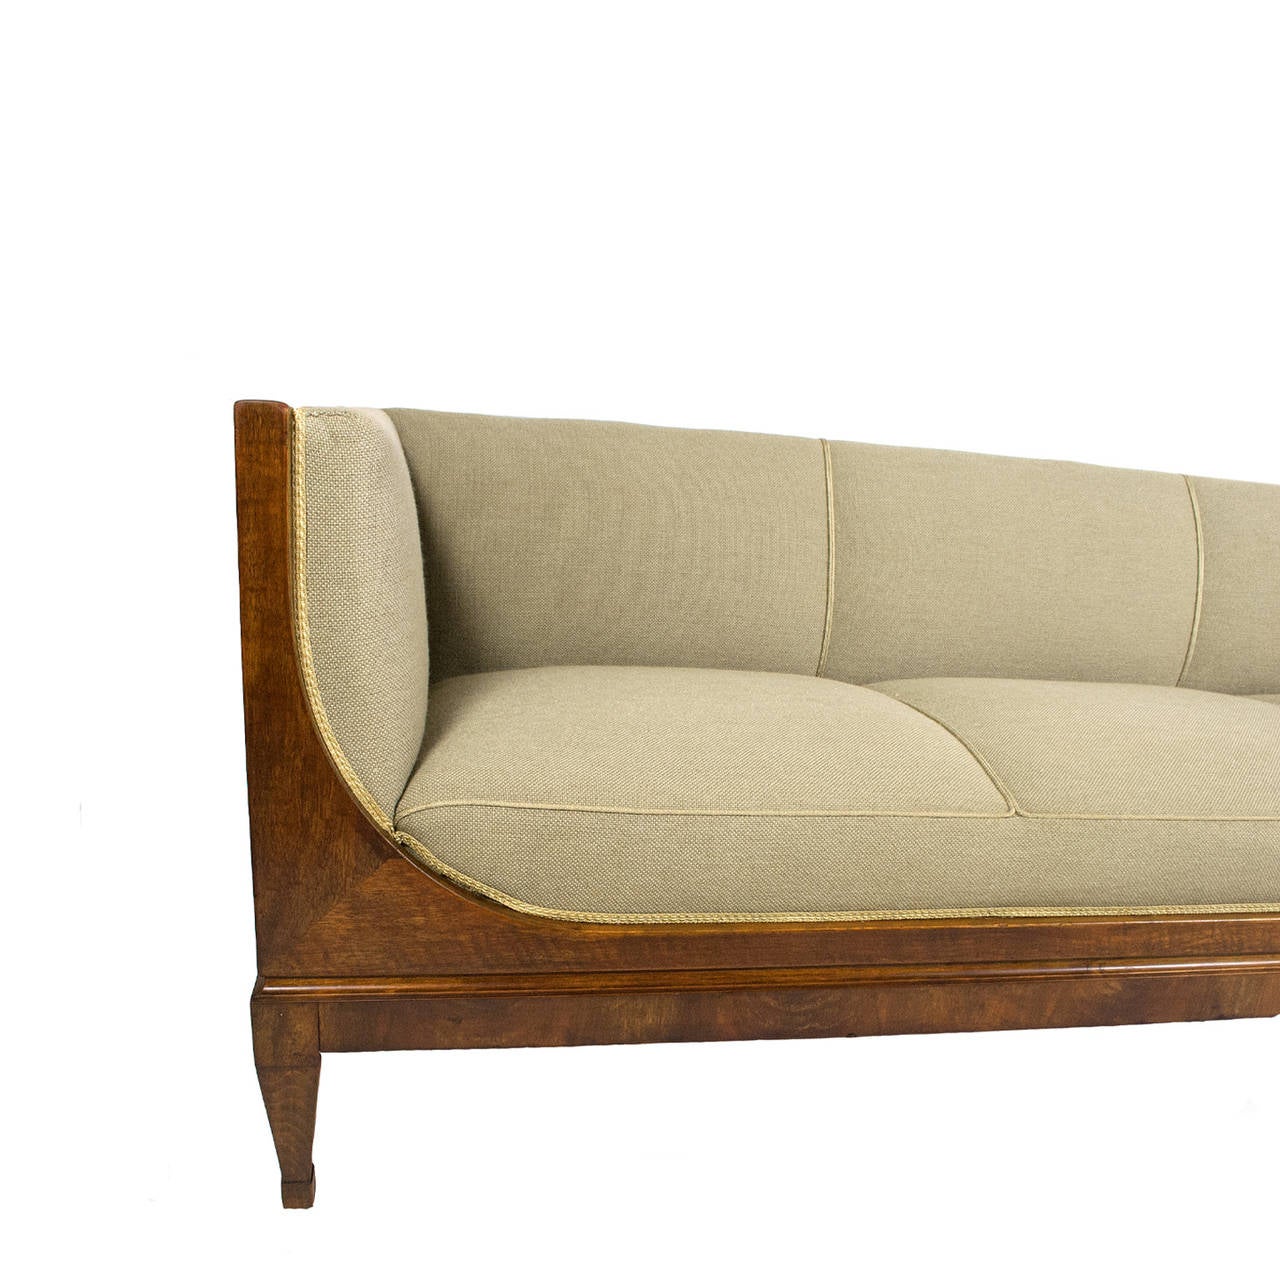 Three seat sofa designed and made by Danish cabinetmaker Frits Henningsen, walnut and original wool upholstery.